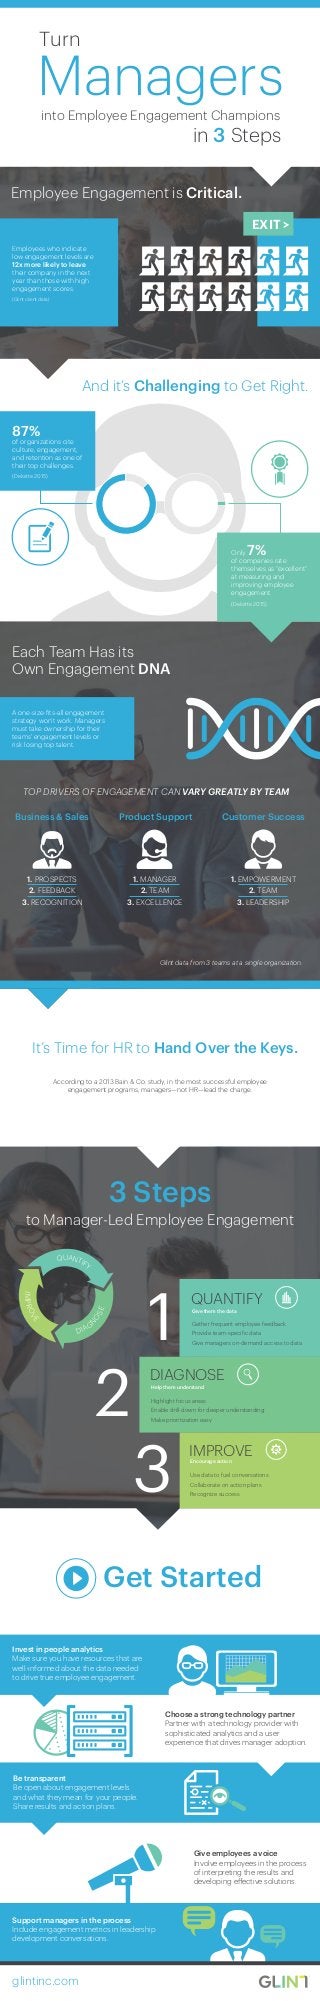 Employee Engagement is Critical.
And it’s Challenging to Get Right.
Each Team Has its
Own Engagement DNA
According to a 2013 Bain & Co. study, in the most successful employee
engagement programs, managers—not HR—lead the charge.
It’s Time for HR to Hand Over the Keys.
3 Steps
to Manager-Led Employee Engagement
Invest in people analytics
Make sure you have resources that are
well-informed about the data needed
to drive true employee engagement.
A one-size-fits-all engagement
strategy won’t work. Managers
must take ownership for their
teams' engagement levels or
risk losing top talent.
Choose a strong technology partner
Partner with a technology provider with
sophisticated analytics and a user
experience that drives manager adoption.
Be transparent
Be open about engagement levels
and what they mean for your people.
Share results and action plans.
Give employees a voice
Involve employees in the process
of interpreting the results and
developing effective solutions.
Only 7%
of companies rate
themselves as “excellent”
at measuring and
improving employee
engagement.
(Deloitte 2015)
QUANTIFY
IMPROVE
DIAG
N
OSE
DIAGNOSE
Highlight focus areas
Enable drill-down for deeper understanding
Make prioritization easy
2
IMPROVE
Use data to fuel conversations
Collaborate on action plans
Recognize success
3
QUANTIFY
Gather frequent employee feedback
Provide team-specific data
Give managers on-demand access to data
1
Get Started
Support managers in the process
Include engagement metrics in leadership
development conversations.
glintinc.com
1. PROSPECTS
2. FEEDBACK
3. RECOGNITION
Business & Sales Product Support
1. MANAGER
2. TEAM
3. EXCELLENCE
Customer Success
1. EMPOWERMENT
2. TEAM
3. LEADERSHIP
EXIT >
Employees who indicate
low engagement levels are
12x more likely to leave
their company in the next
year than those with high
engagement scores.
(Glint client data)
87%
of organizations cite
culture, engagement,
and retention as one of
their top challenges.
(Deloitte 2015)
TOP DRIVERS OF ENGAGEMENT CAN VARY GREATLY BY TEAM
Glint data from 3 teams at a single organization.
Give them the data
Help them understand
Encourage action
Managersinto Employee Engagement Champions
in 3 Steps
Turn
 